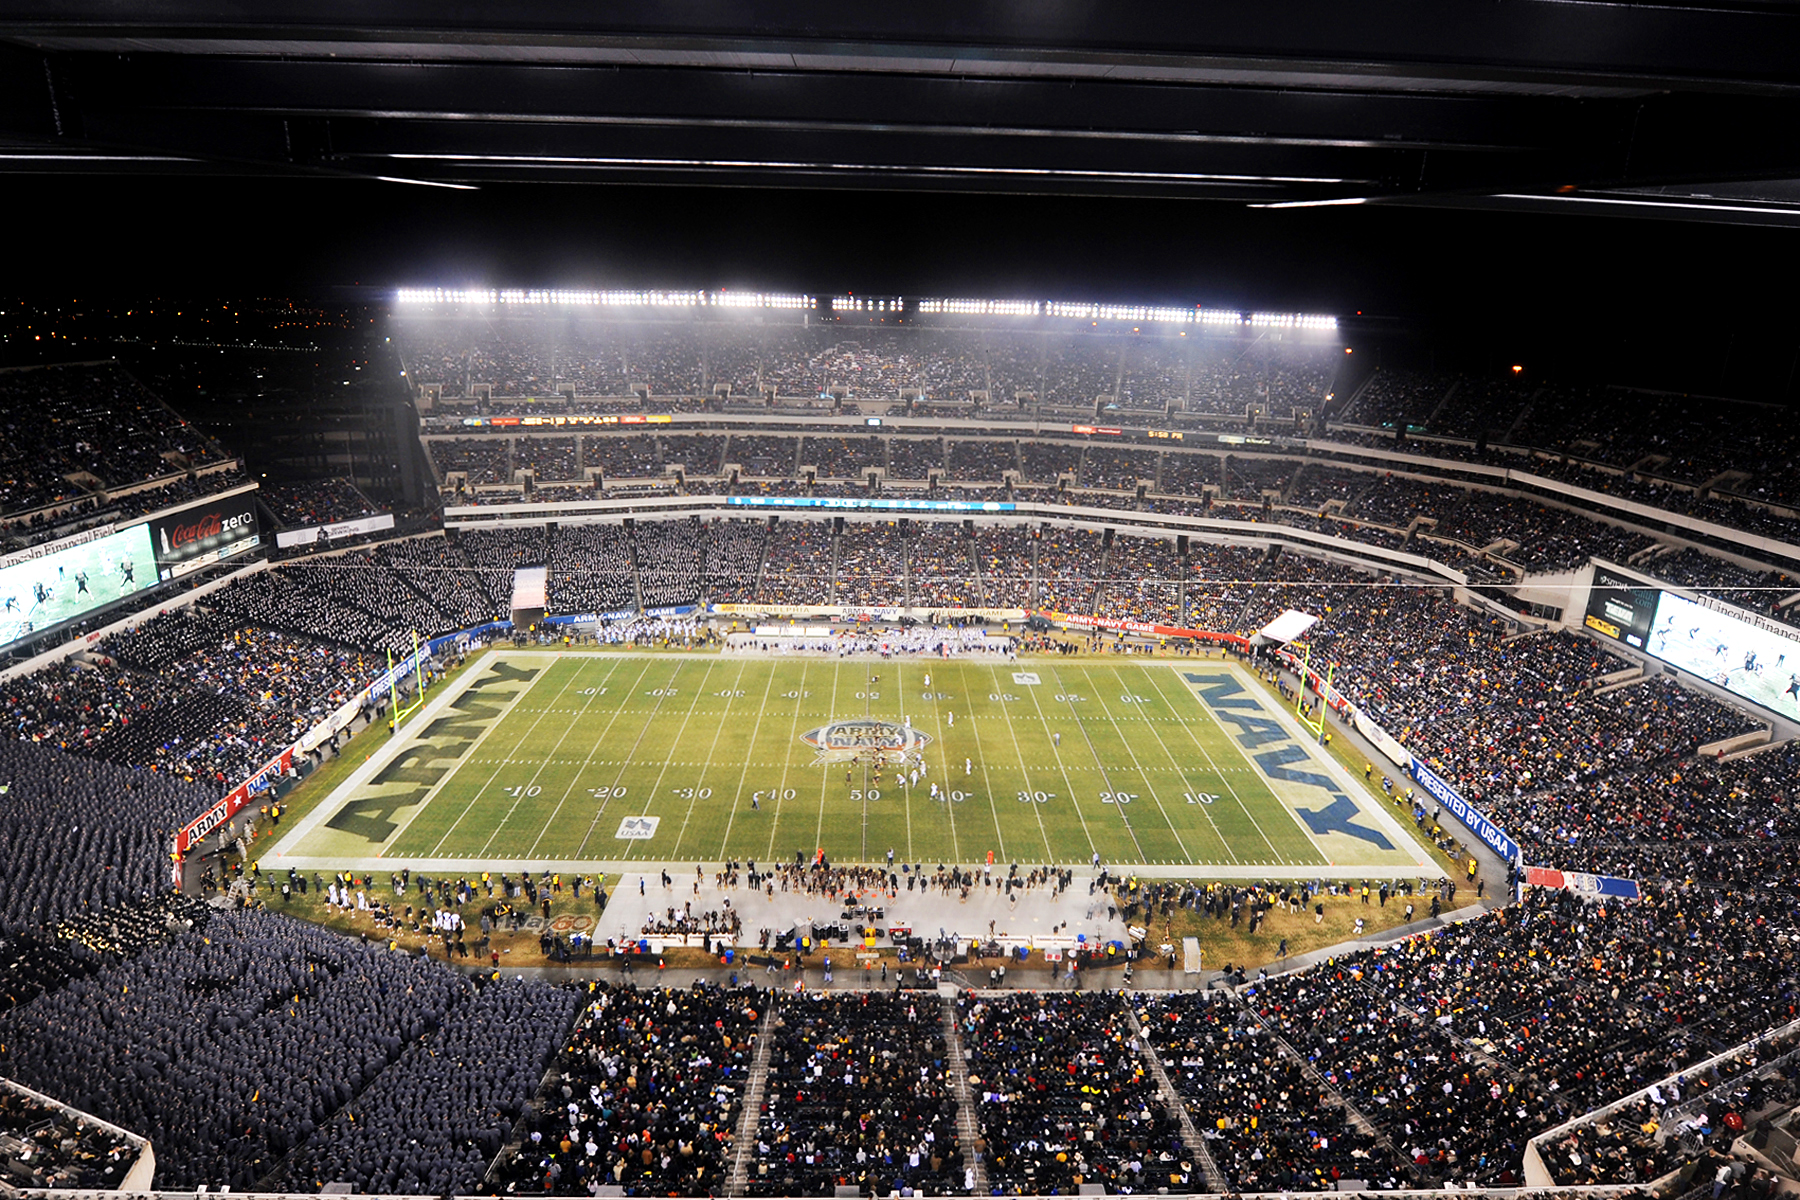 The crowd fills the stadium at Lincoln Financial Field in